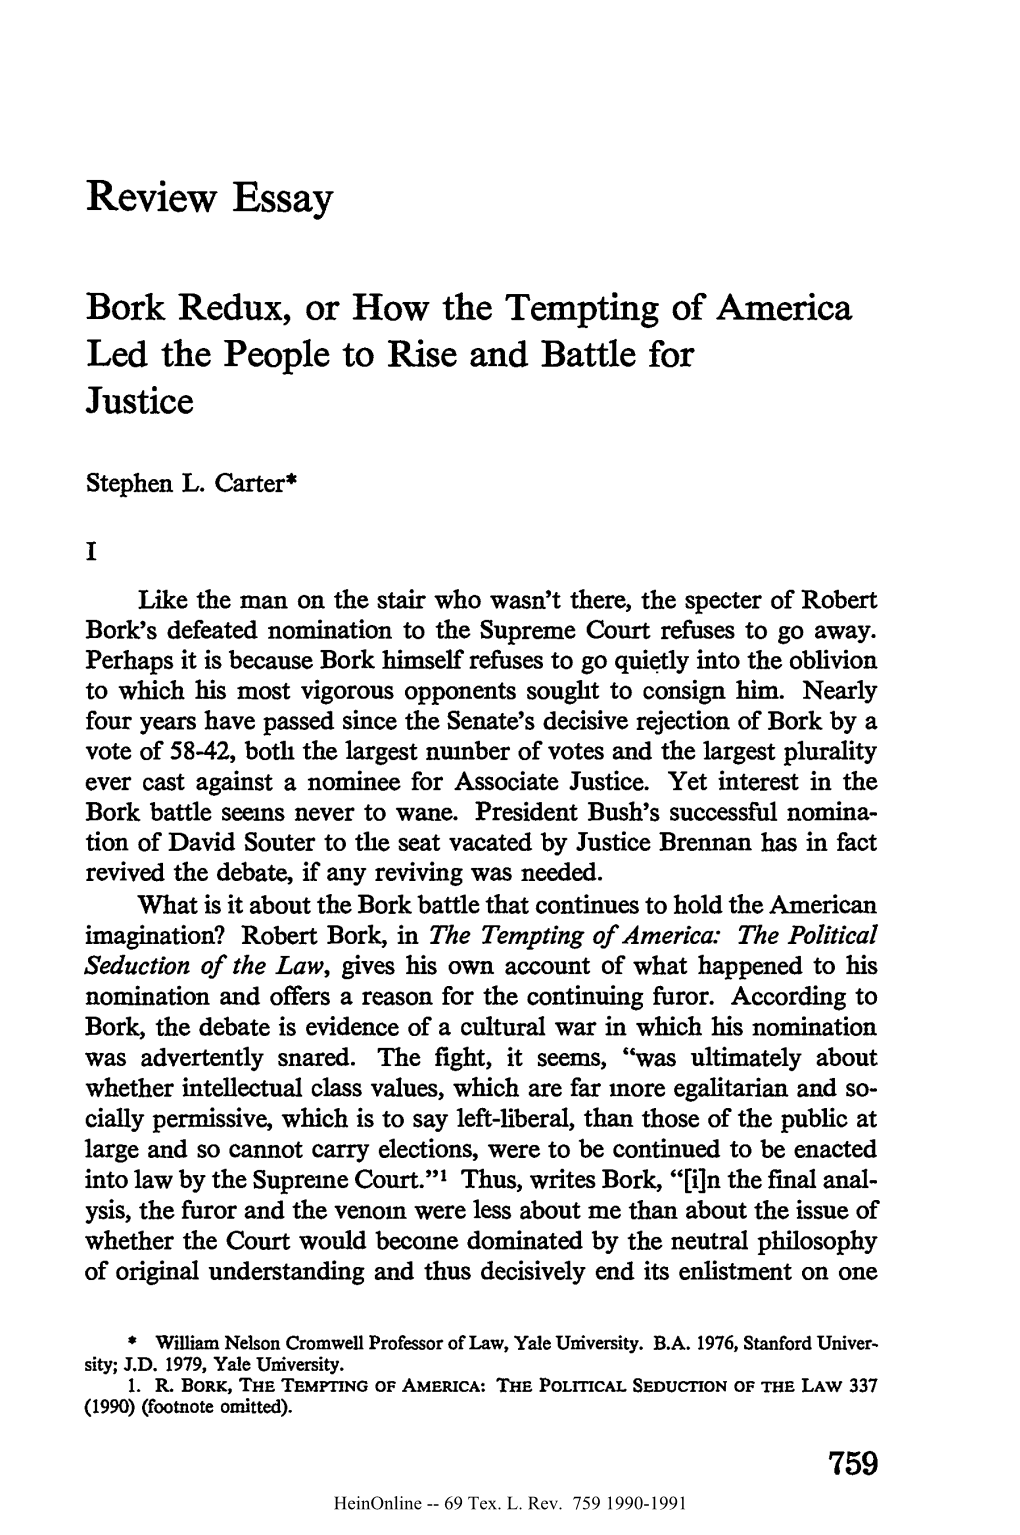 Bork Redux, Or How the Tempting of America Led the People to Rise and Battle for Justice